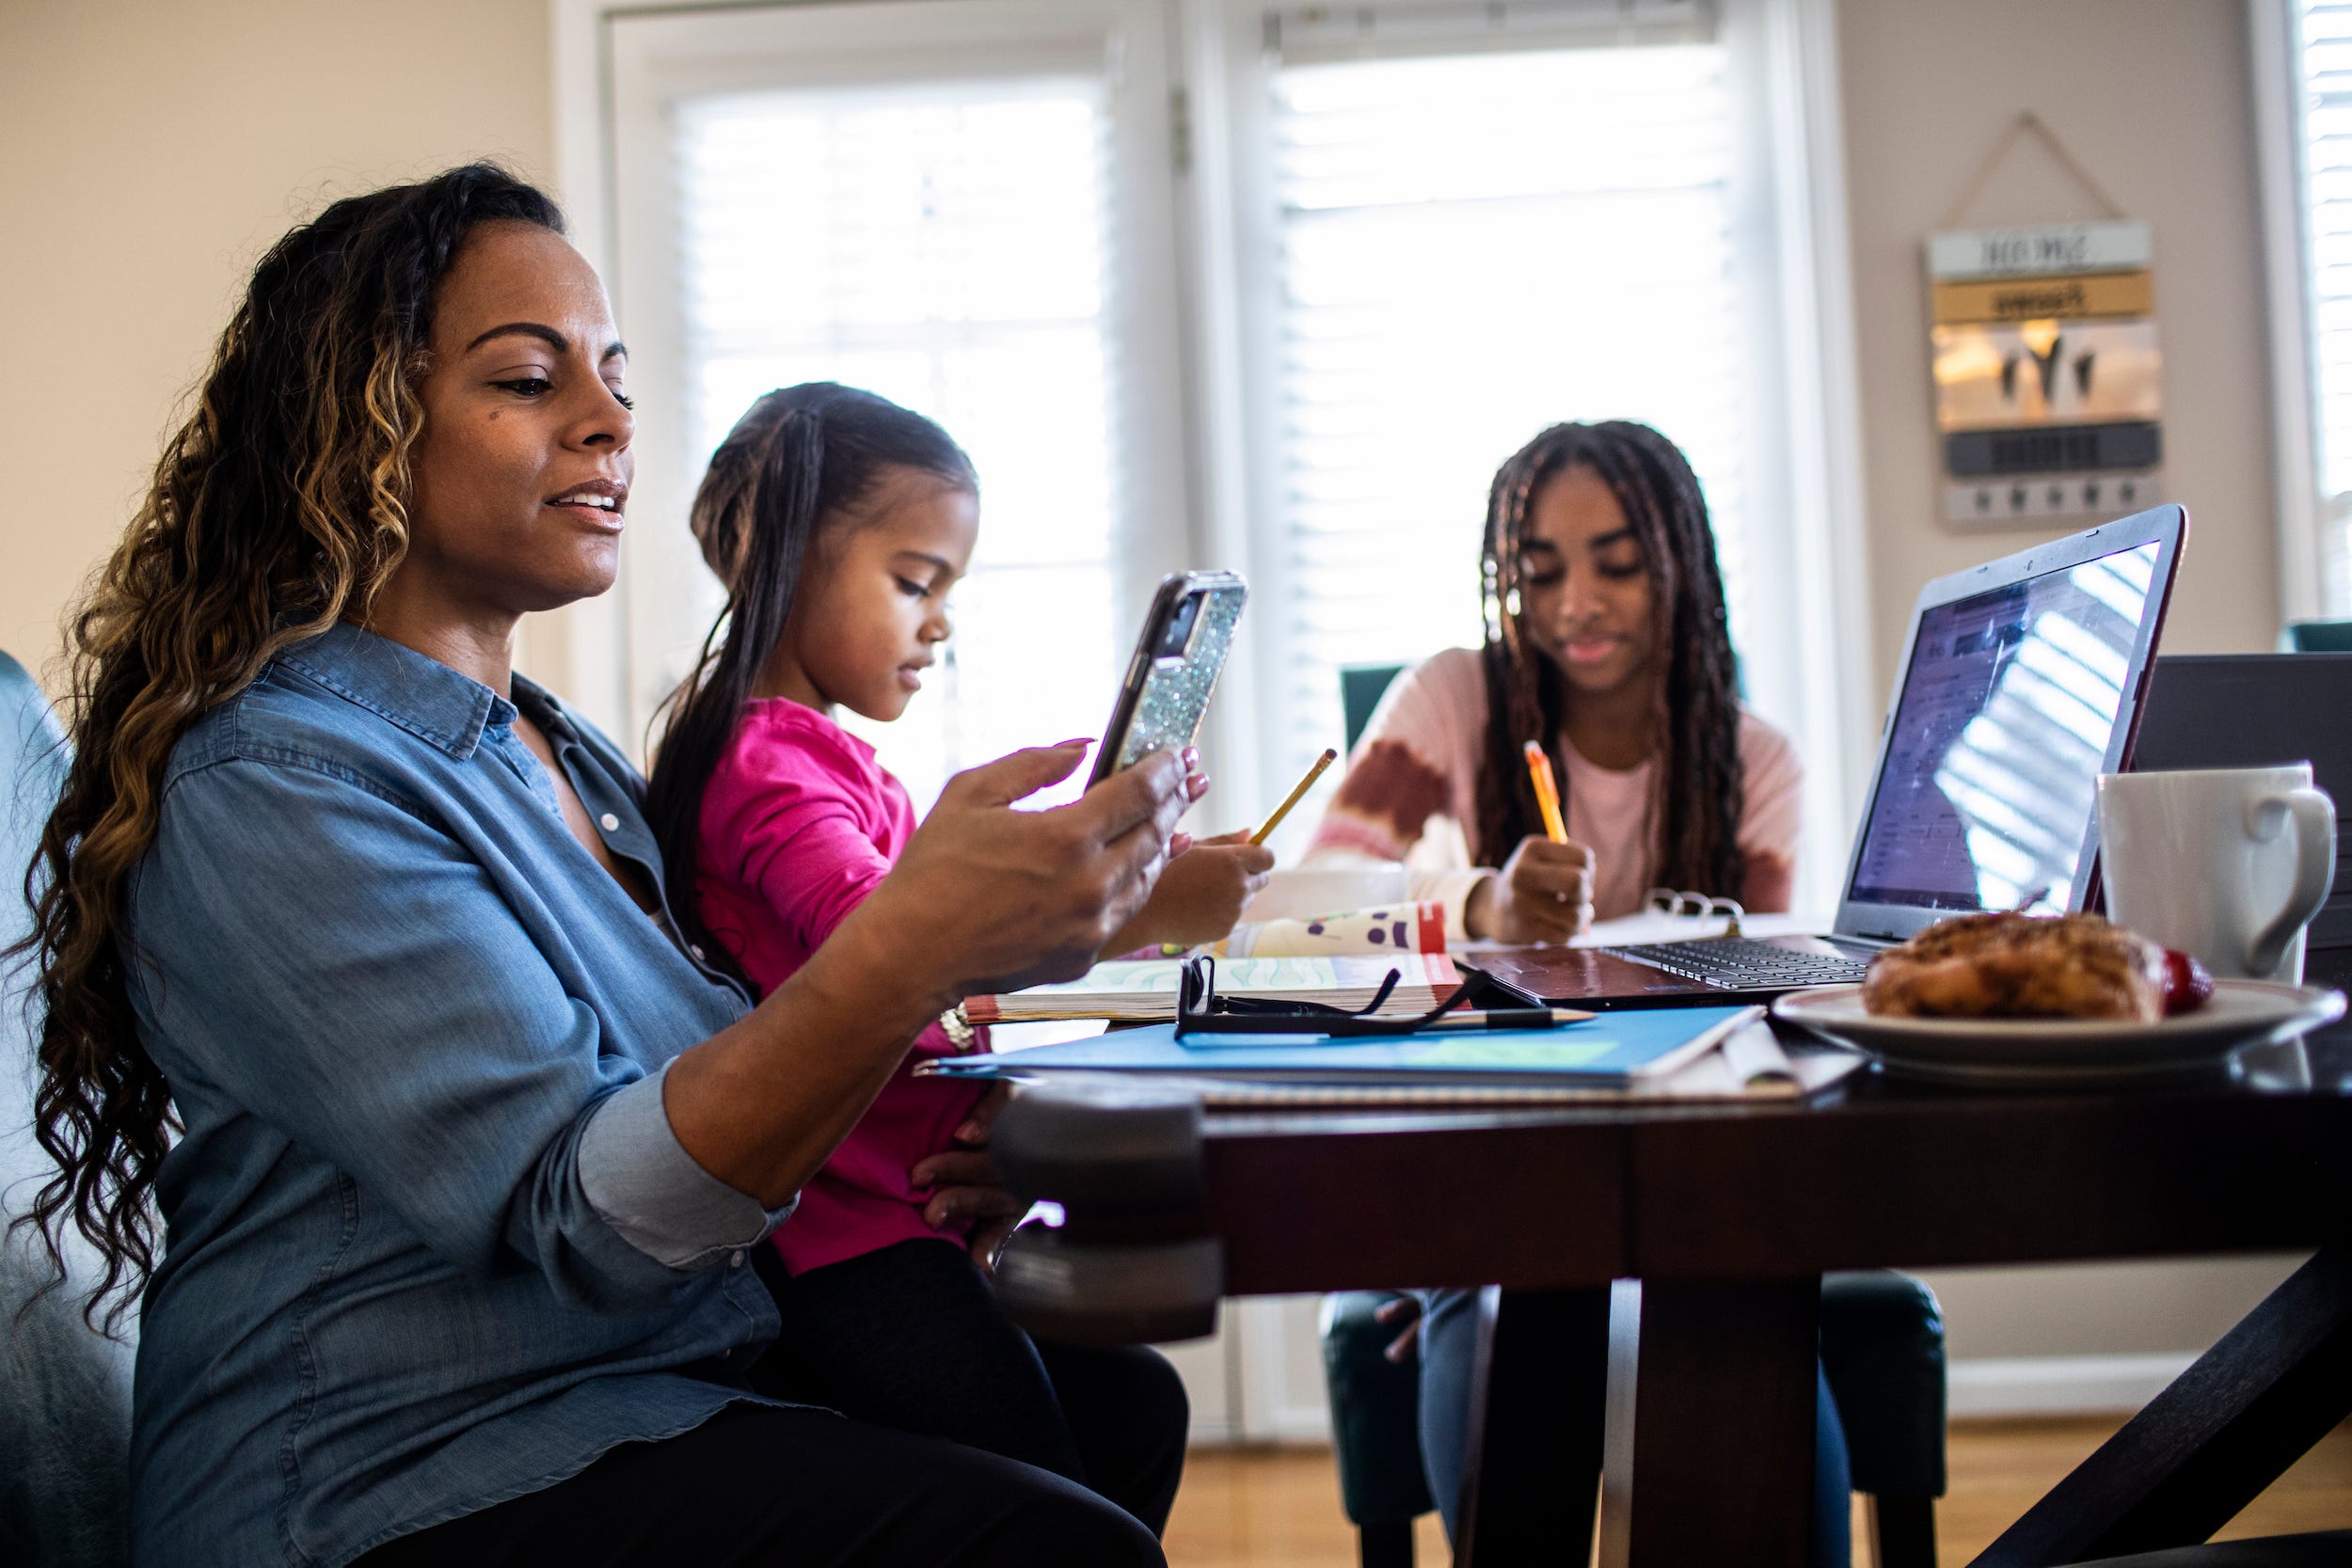 family using internet on phone and laptop at home kitchen table